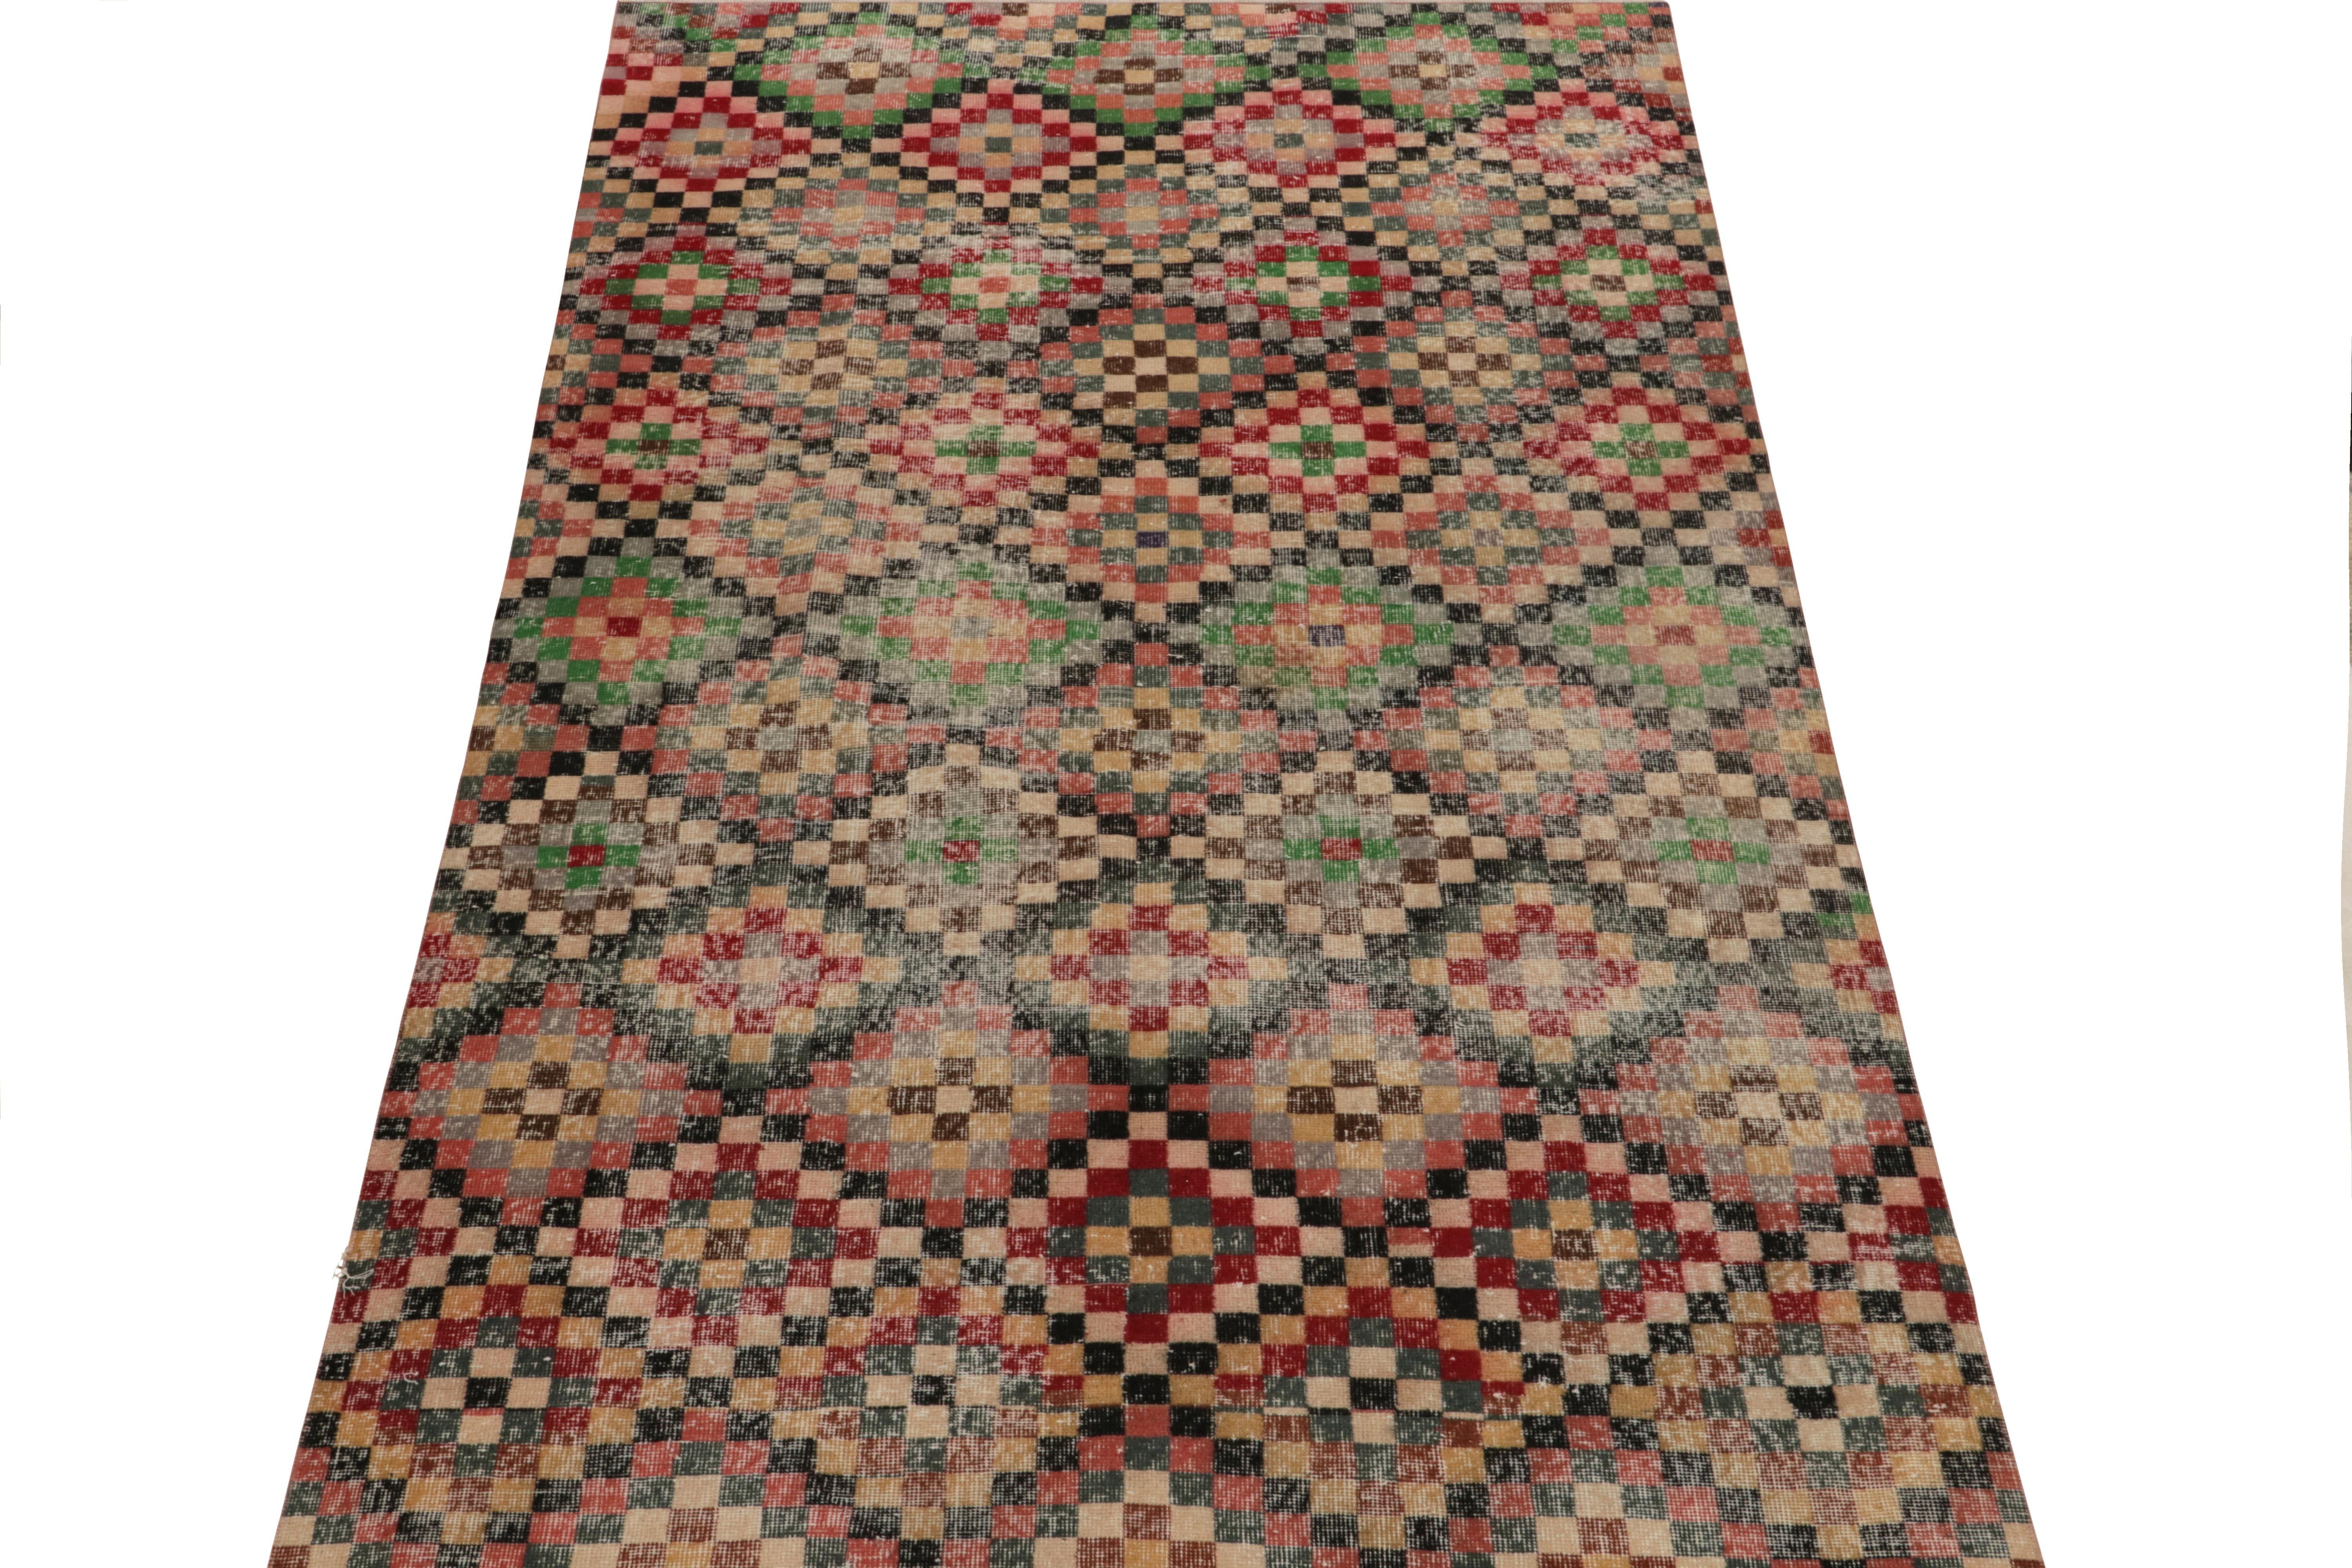 Hand-knotted in wool, a 6x10 vintage rug from a revered Turkish atelier, entering Rug & Kilim’s commemorative mid-century Pasha Collection. This dedicated piece enjoys a dextrous geometric pattern in variegated tones of red, green beige & black—a